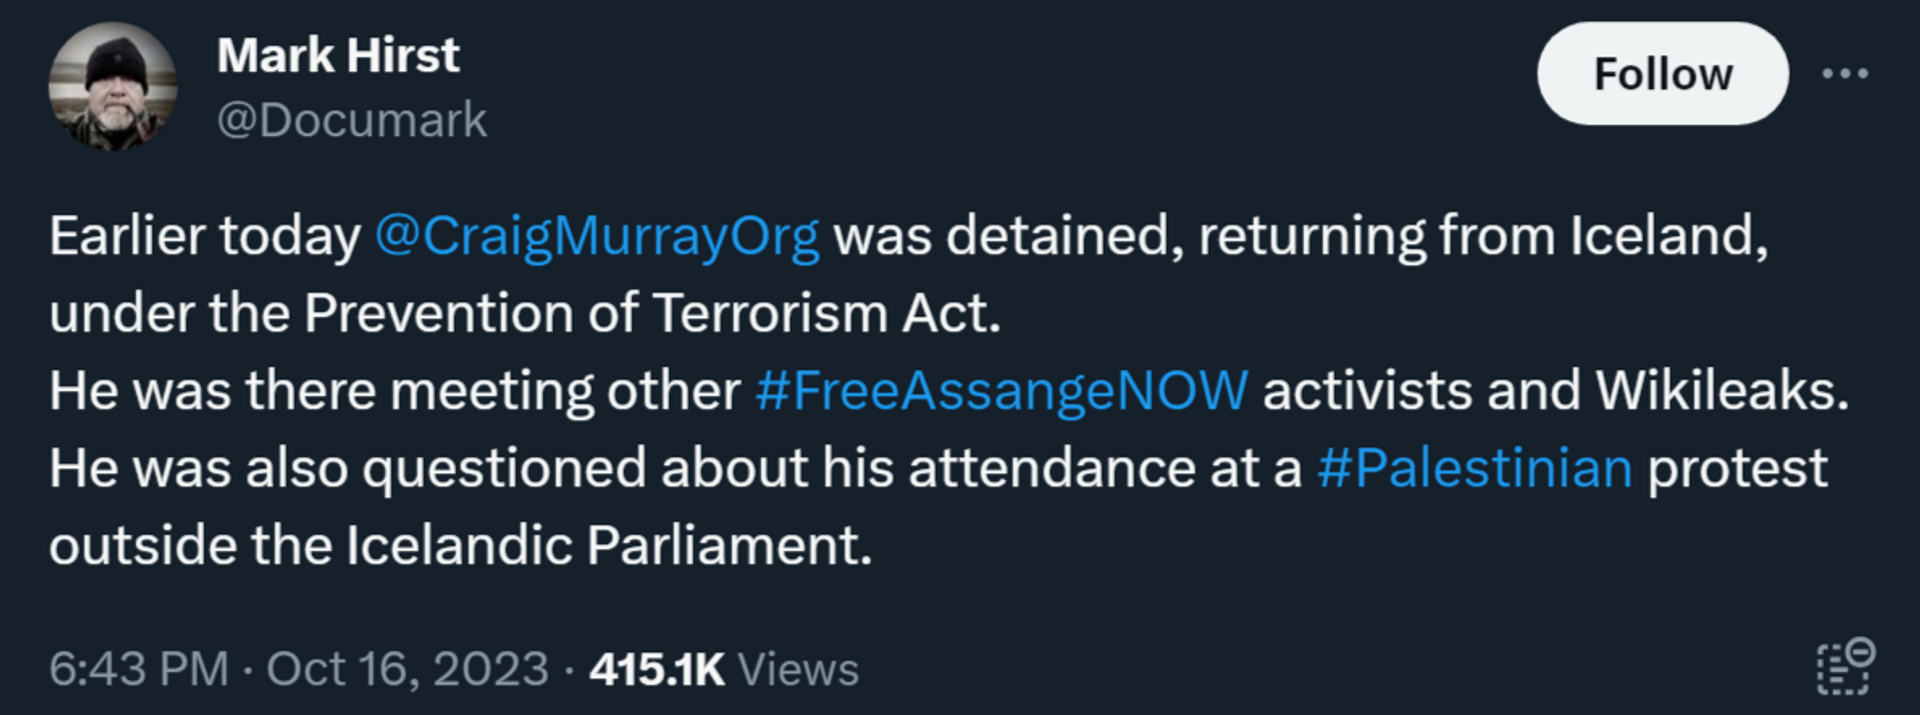 Independent journalist Mark Hirst tweets that his colleague Craig Murray has been arrested on returning from Iceland on Monday October 16, 2023 - Sputnik International, 1920, 17.10.2023